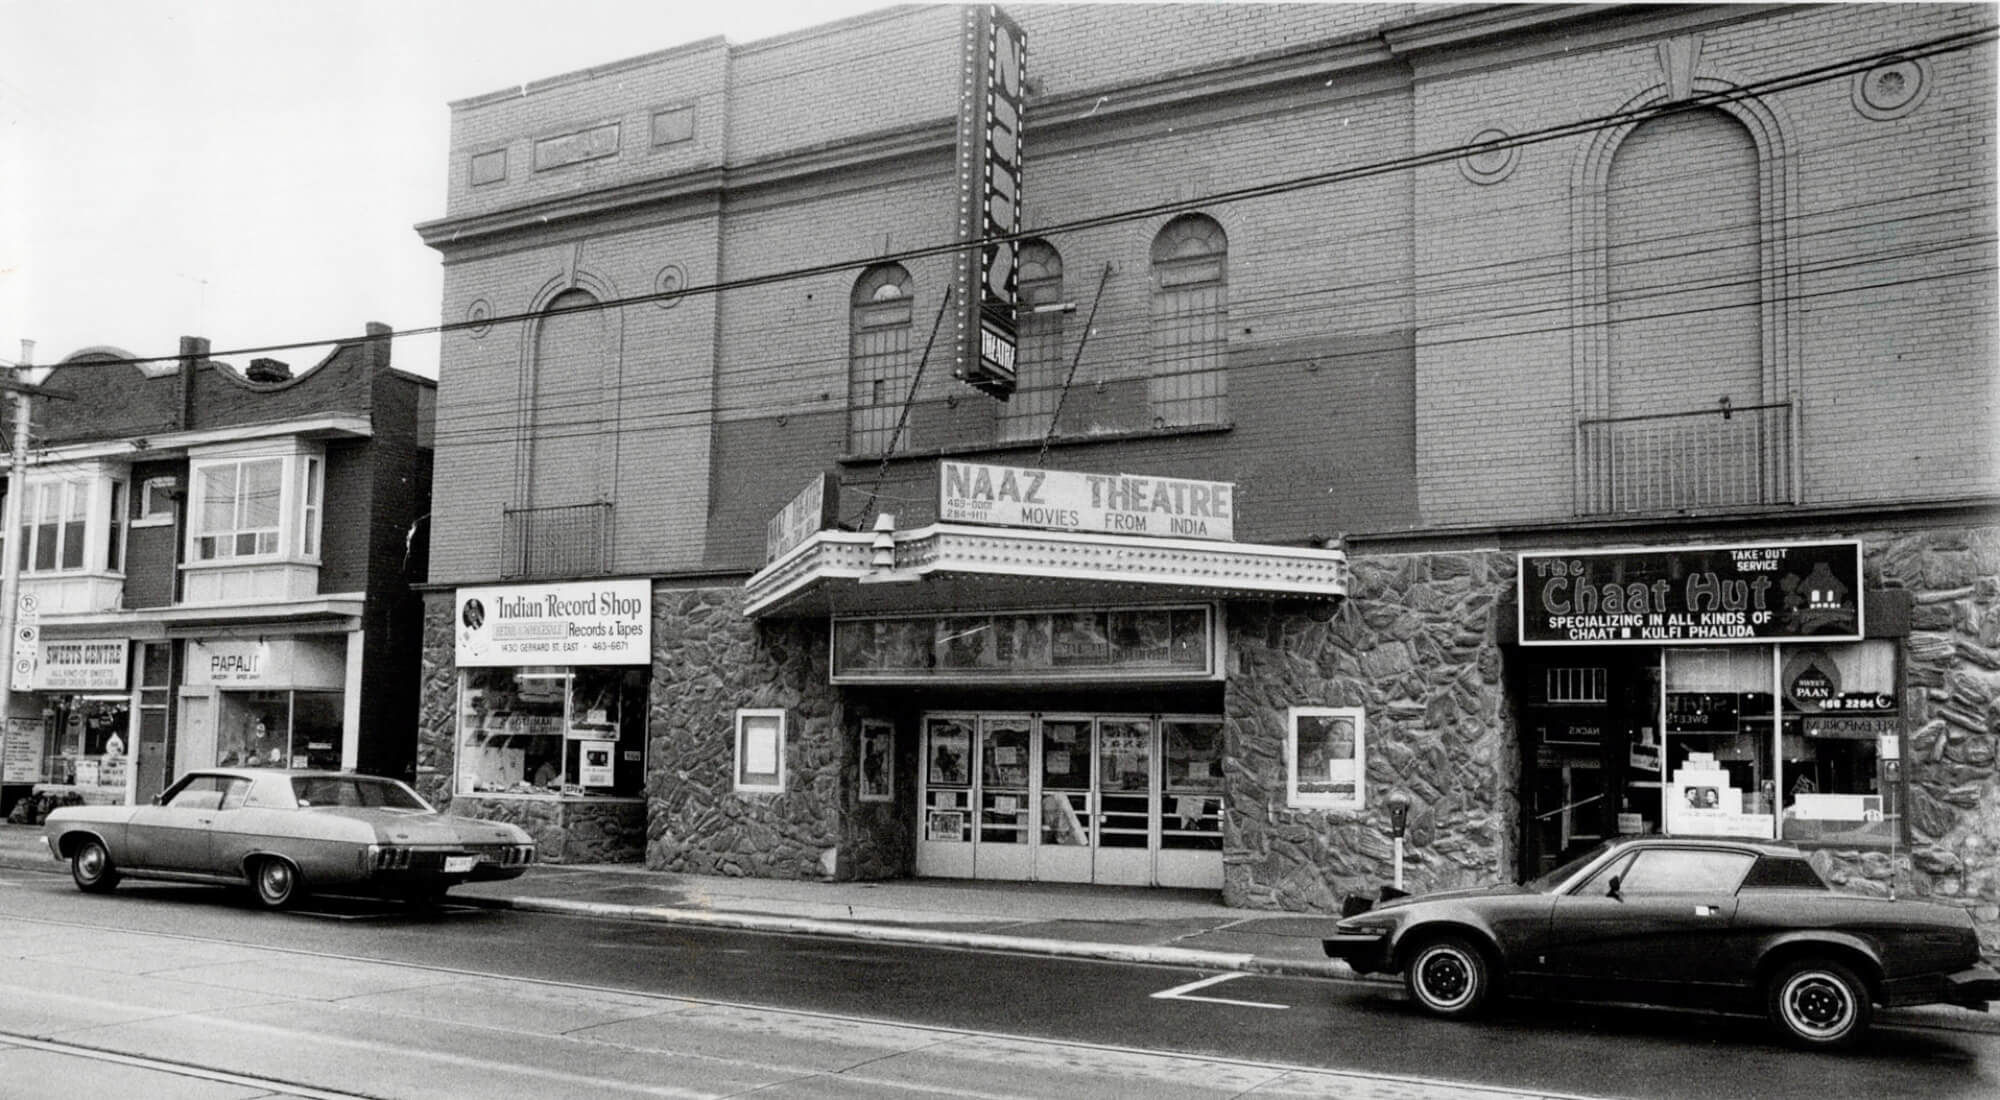 Black and white image of the front of Toronto's Naaz Cinema. The theatre is flanked by an Indian record shop and an Indian restaurant. There are 1980's cars parked in front of the theatre.